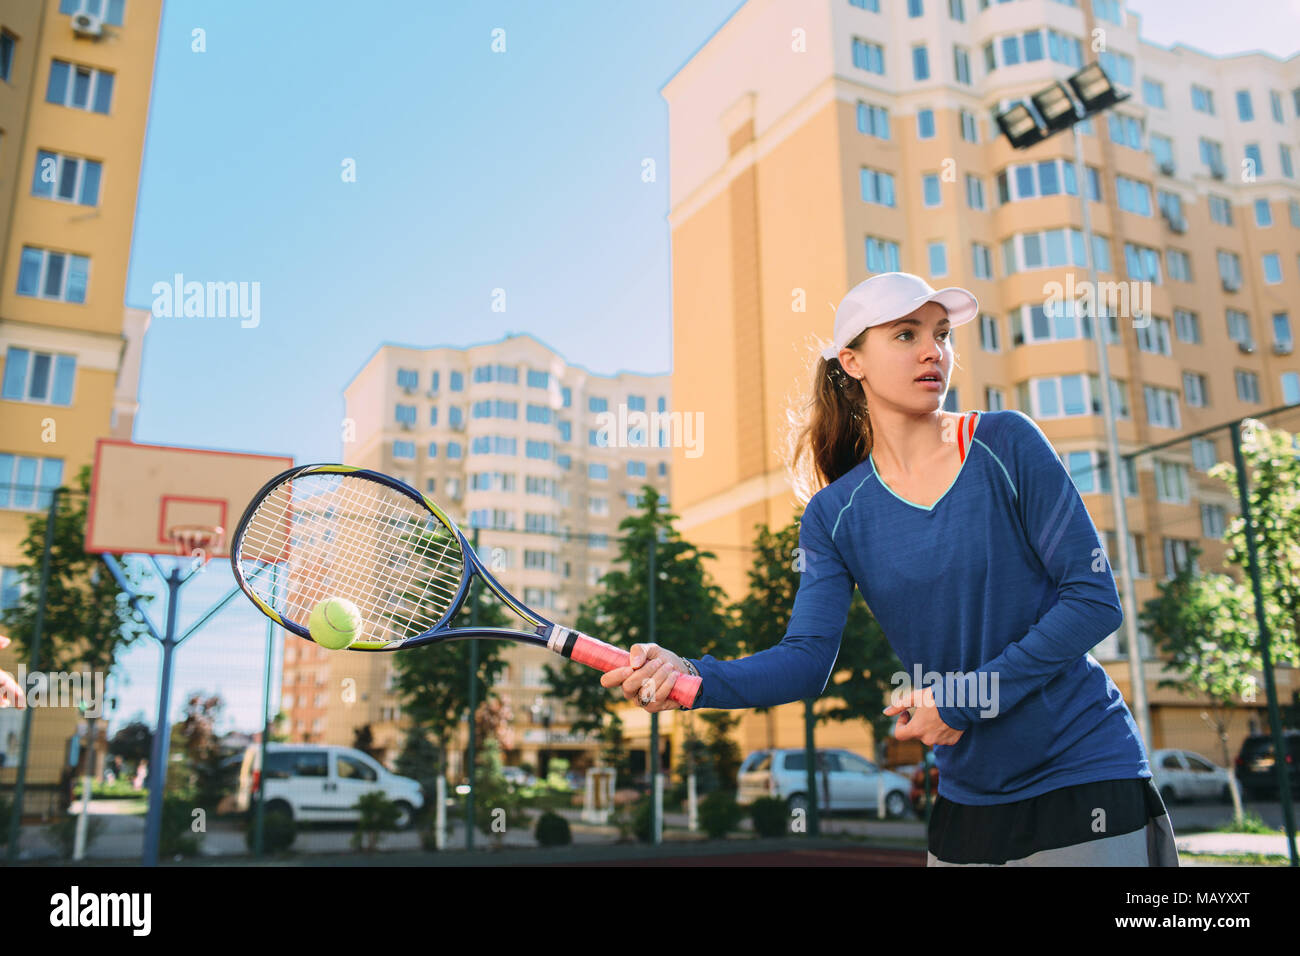 woman playing tennis outdoor, hot shot ball. Practicing tennis on the tennis court at sunny day, on a city background Stock Photo